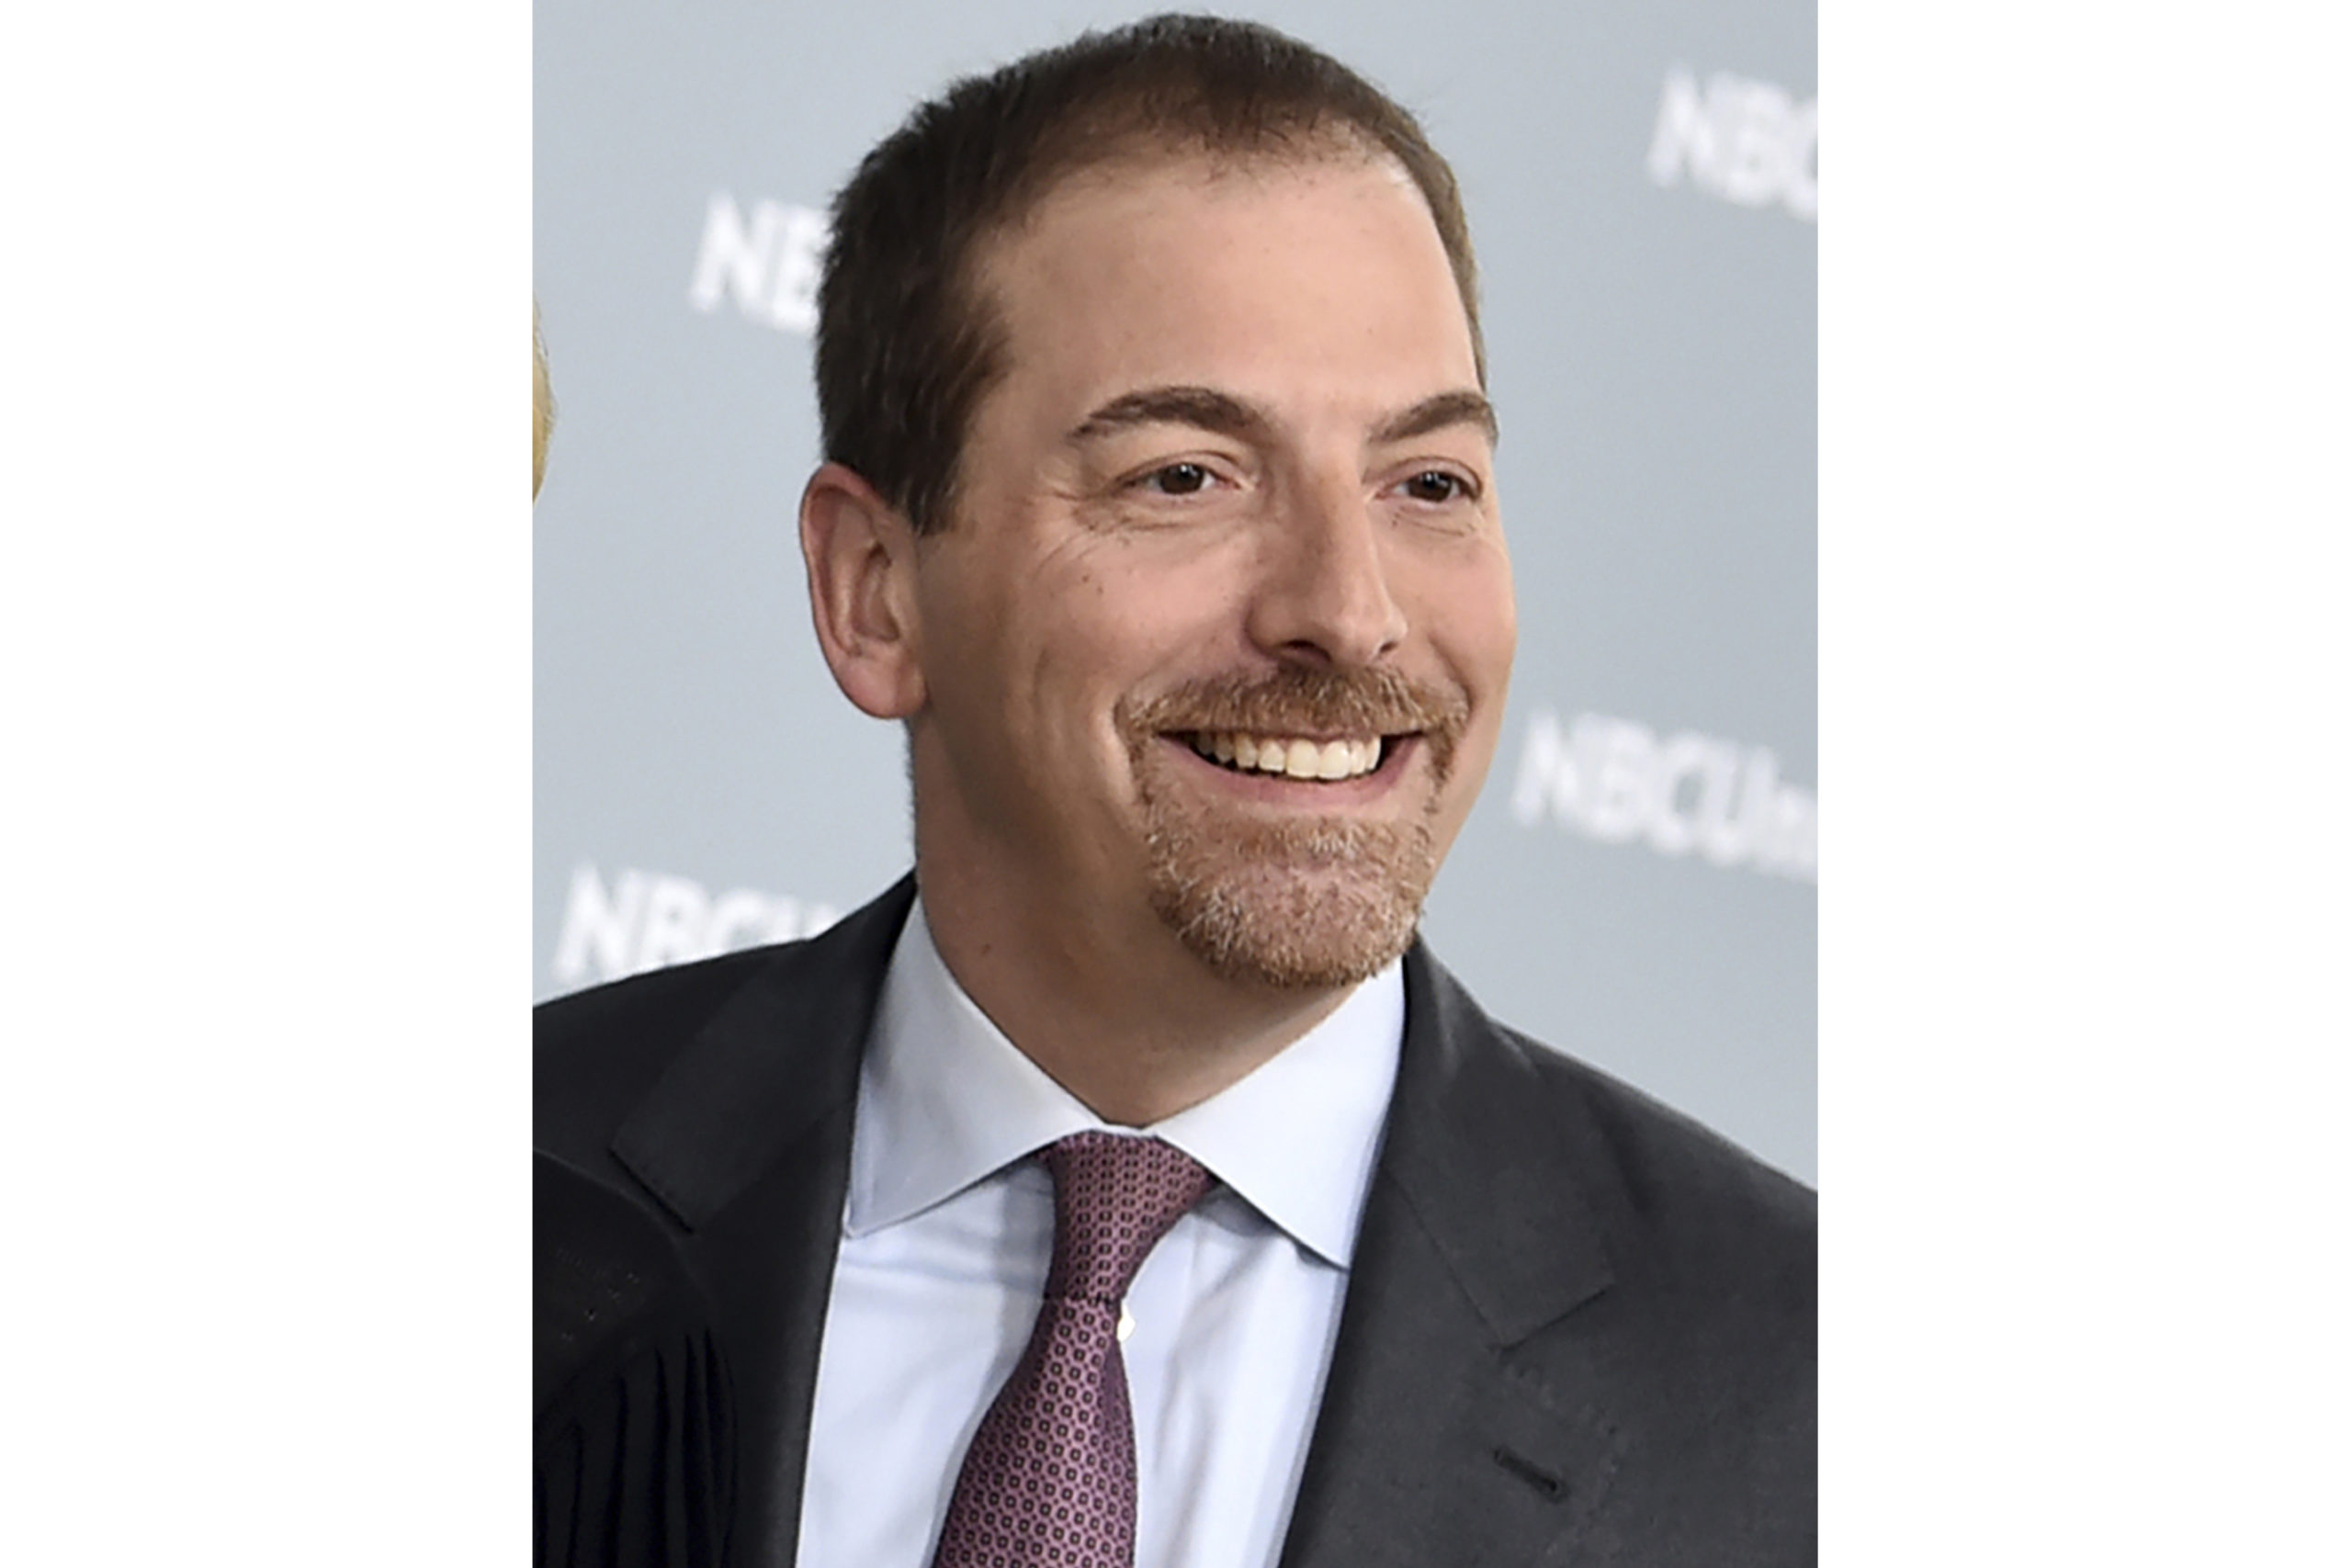 Chuck Todd is leaving NBC’s top show and has announced that this summer will be his last.